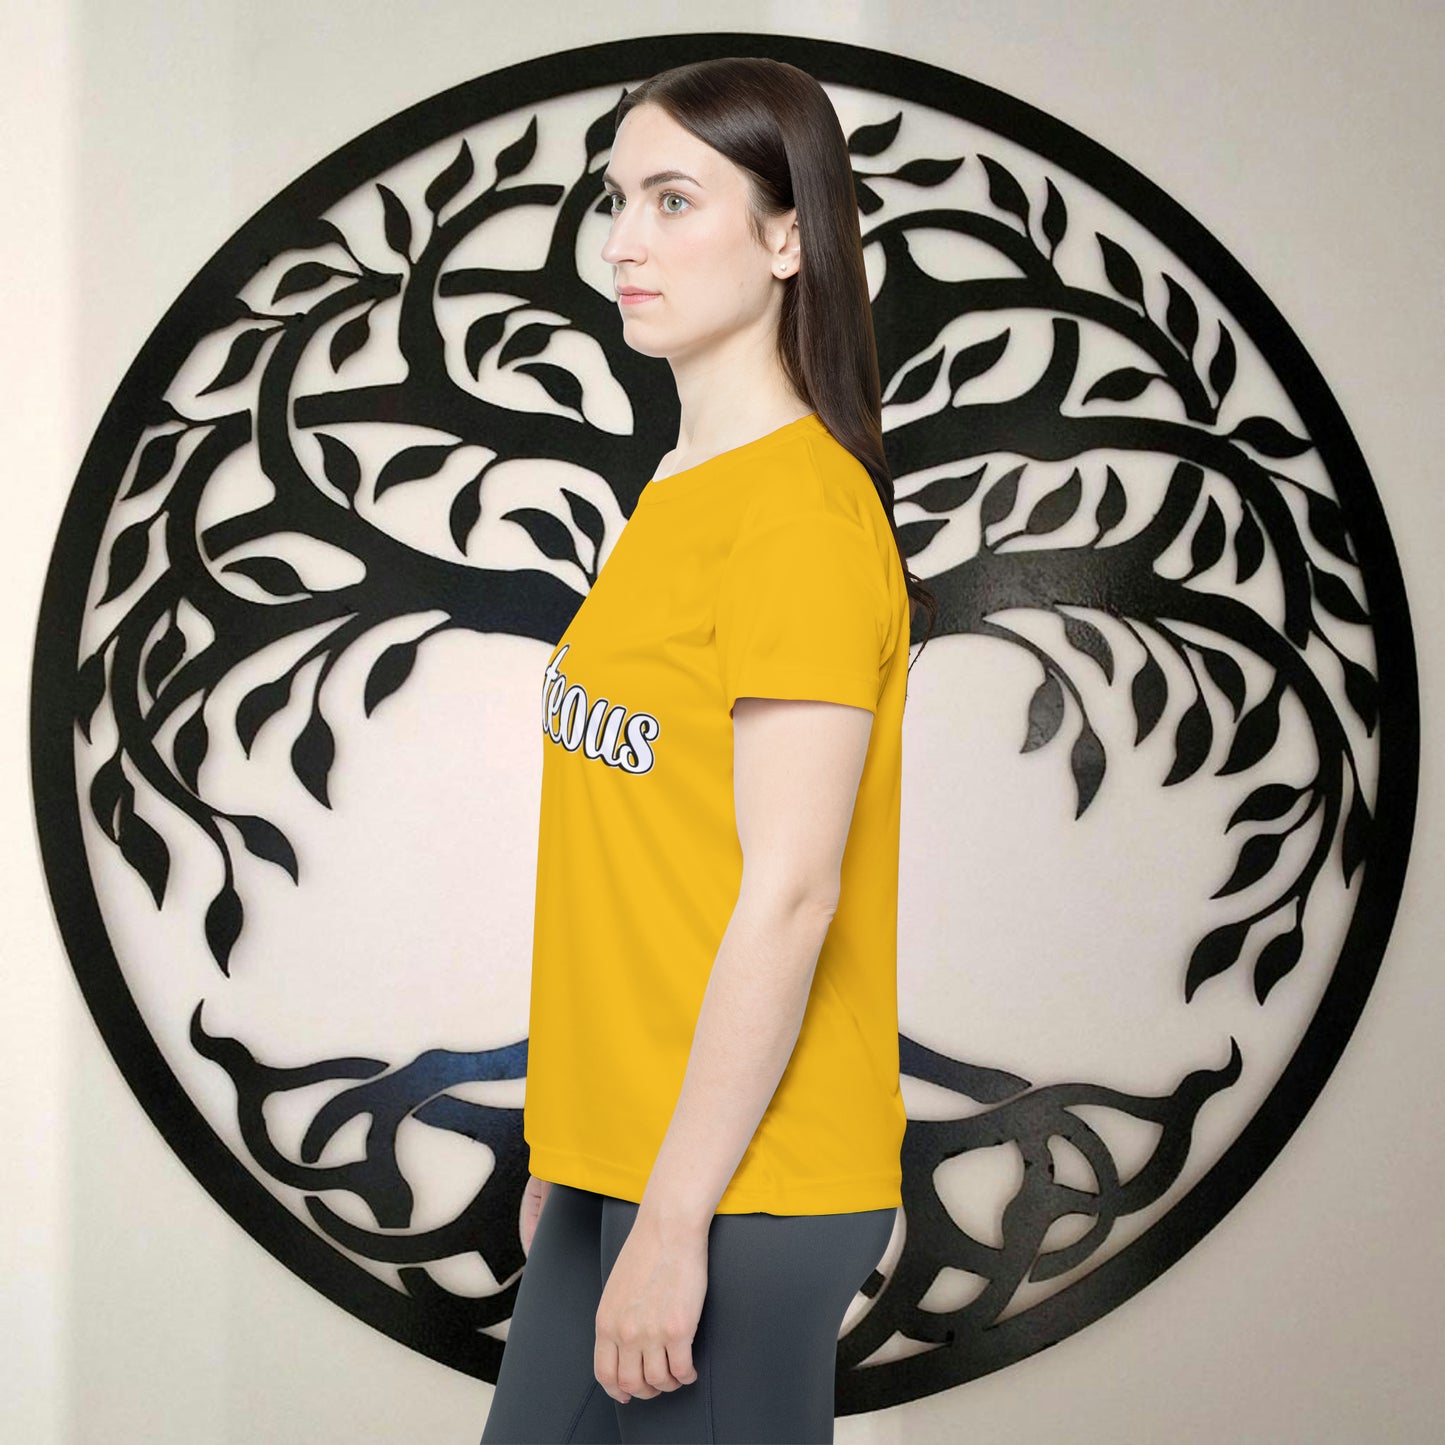 Righteous Meditation Women's Jersey - Find Your Zen (Yellow)